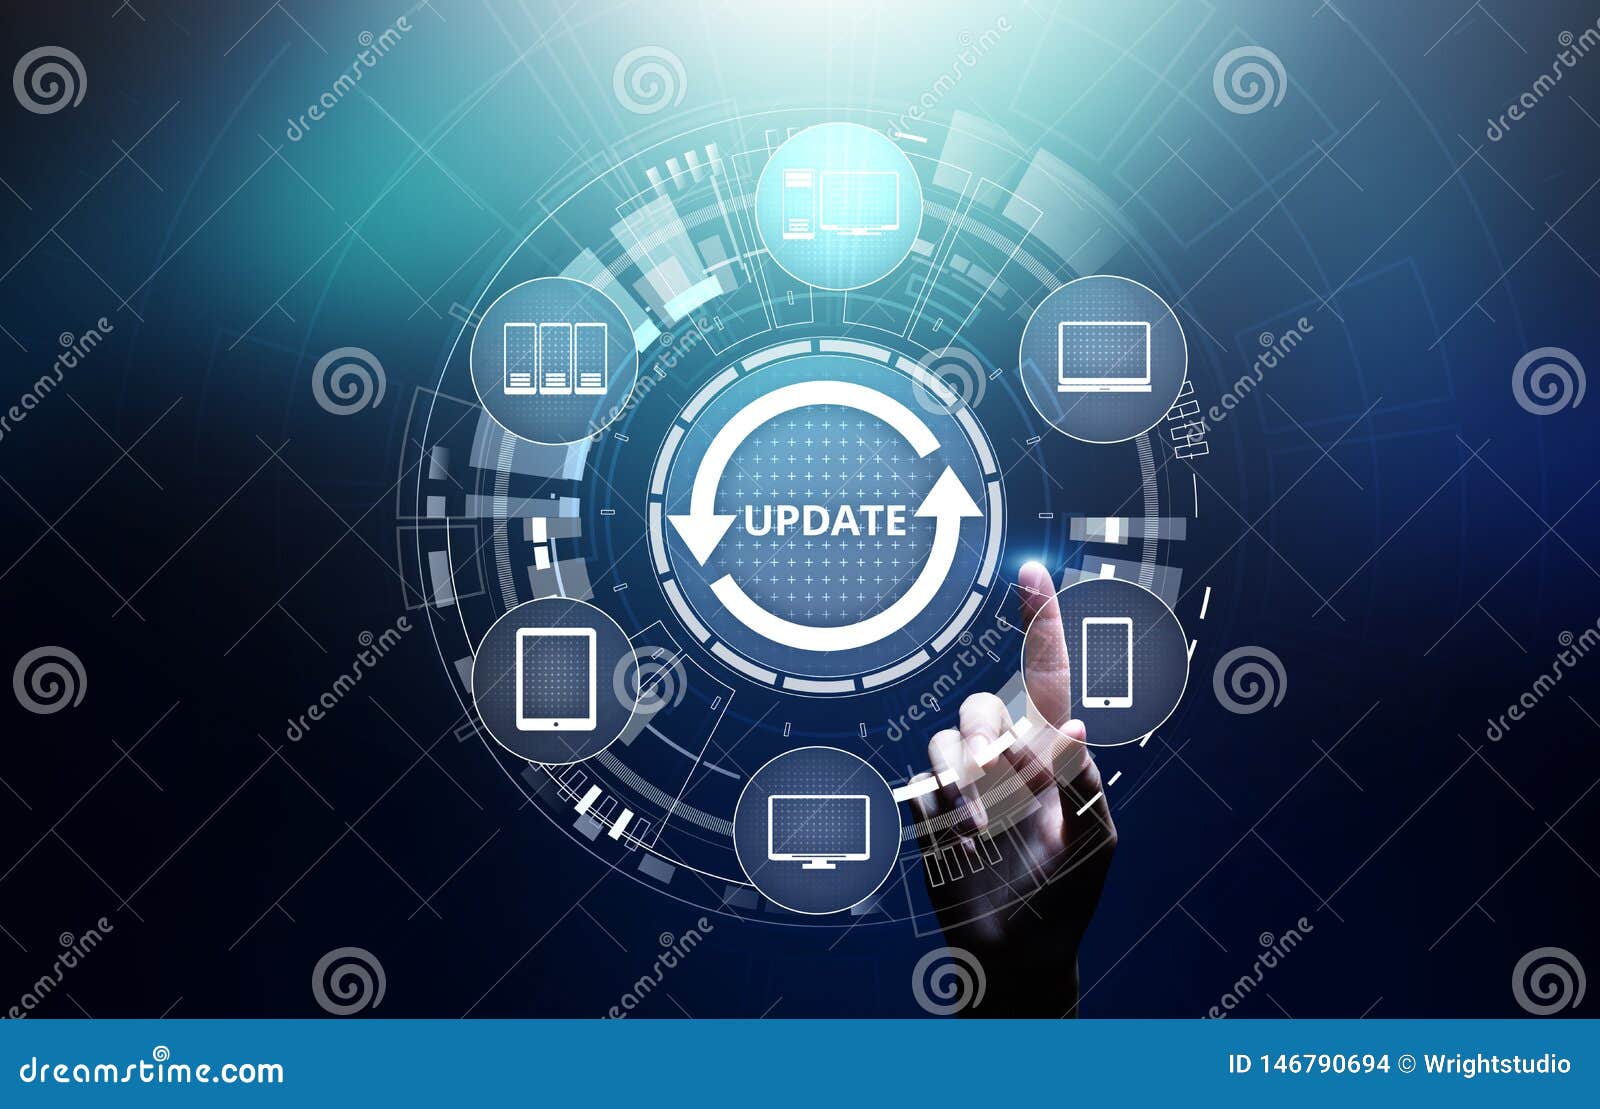 update system upgrade software version technology concept on virtual screen.